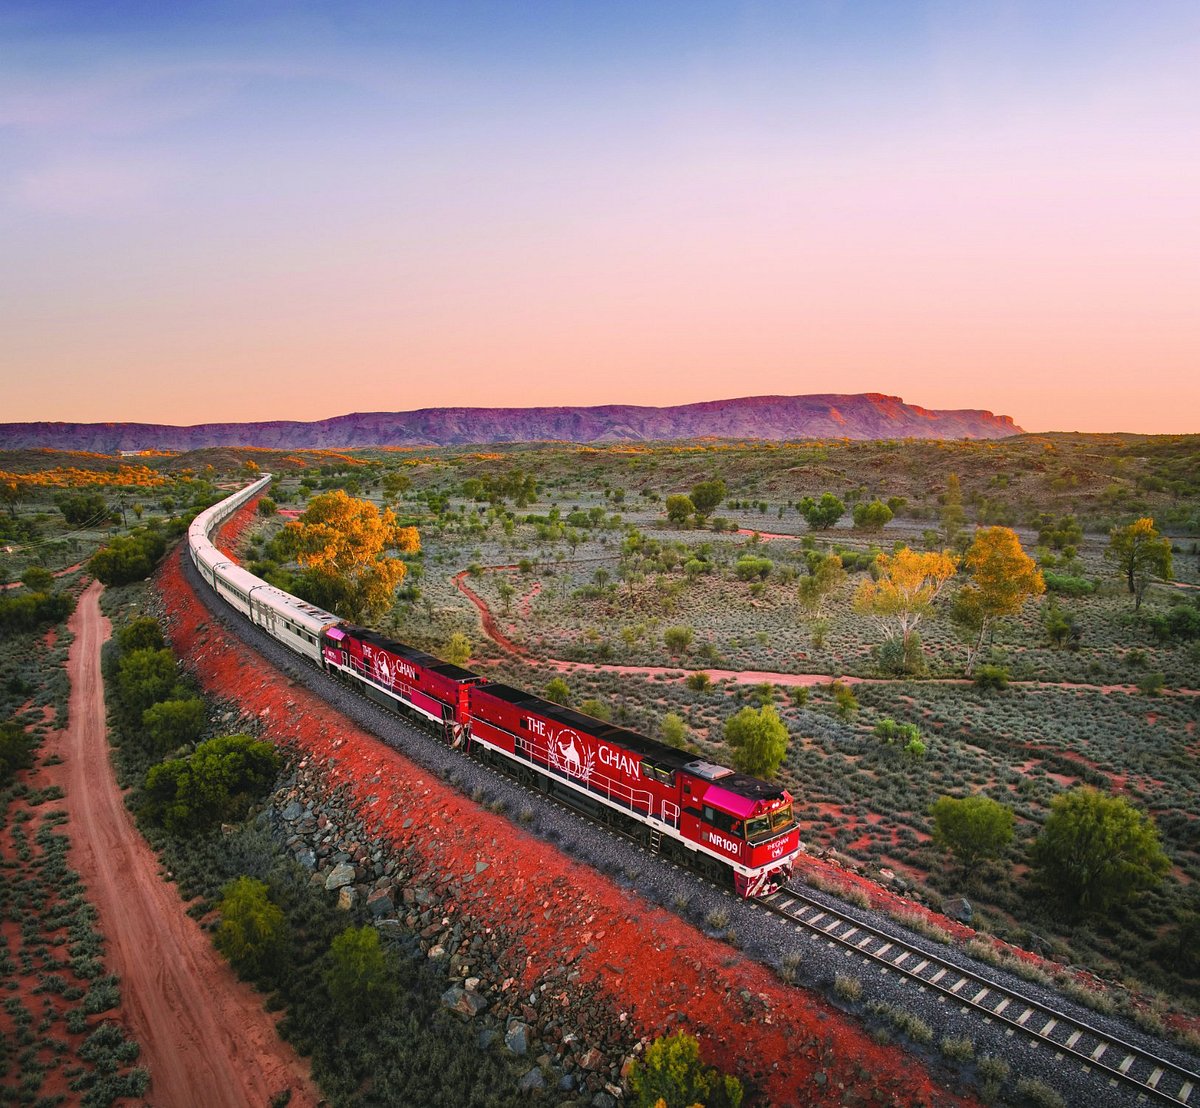 Panoramic View Of The Ghan Train